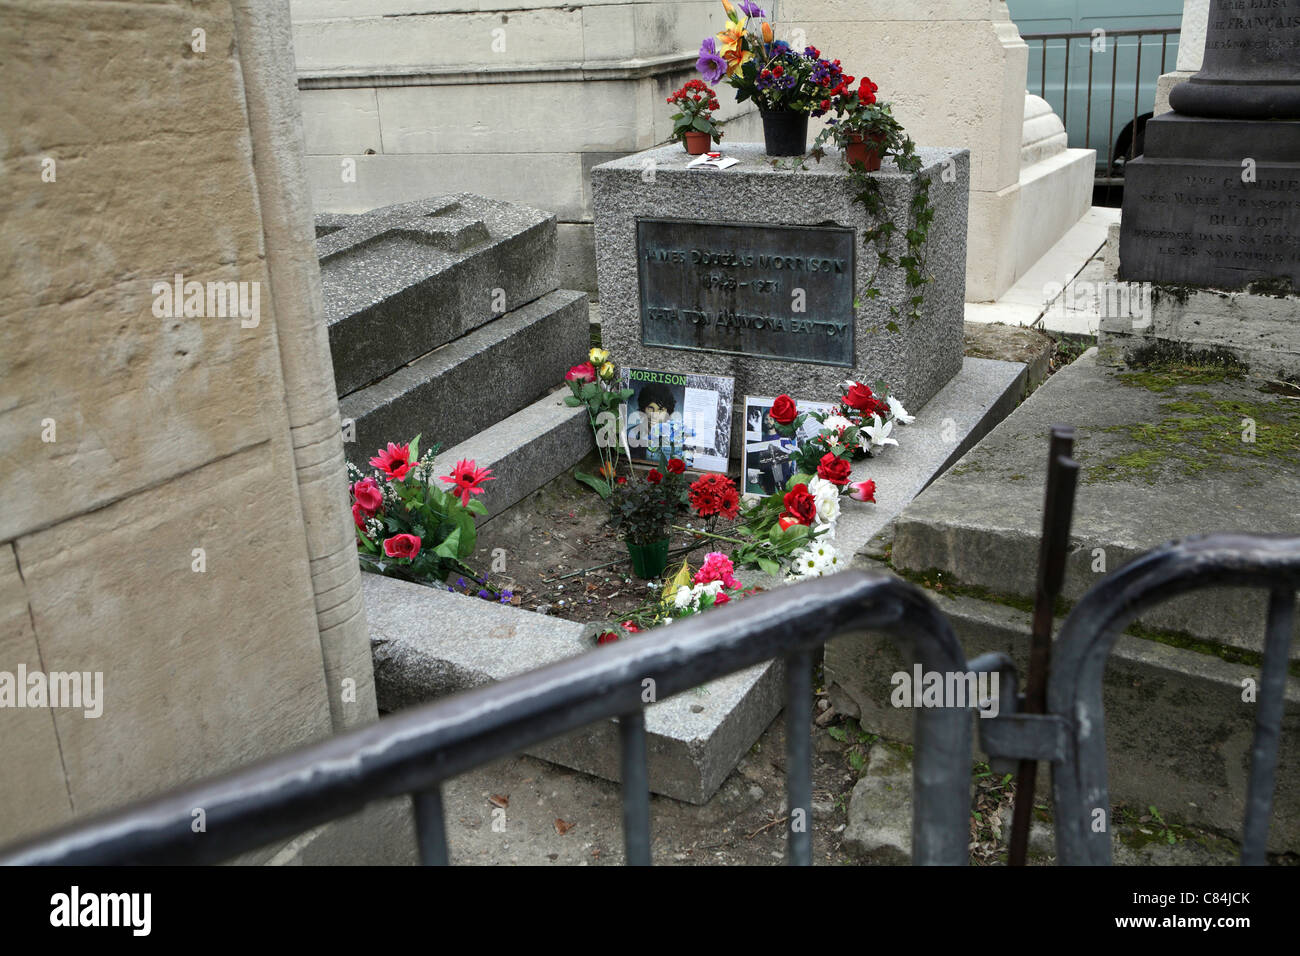 Père Lachaise cemetery in Paris, gravestone of Jim Morrison, rock star who died of an overdose aged 27. Stock Photo